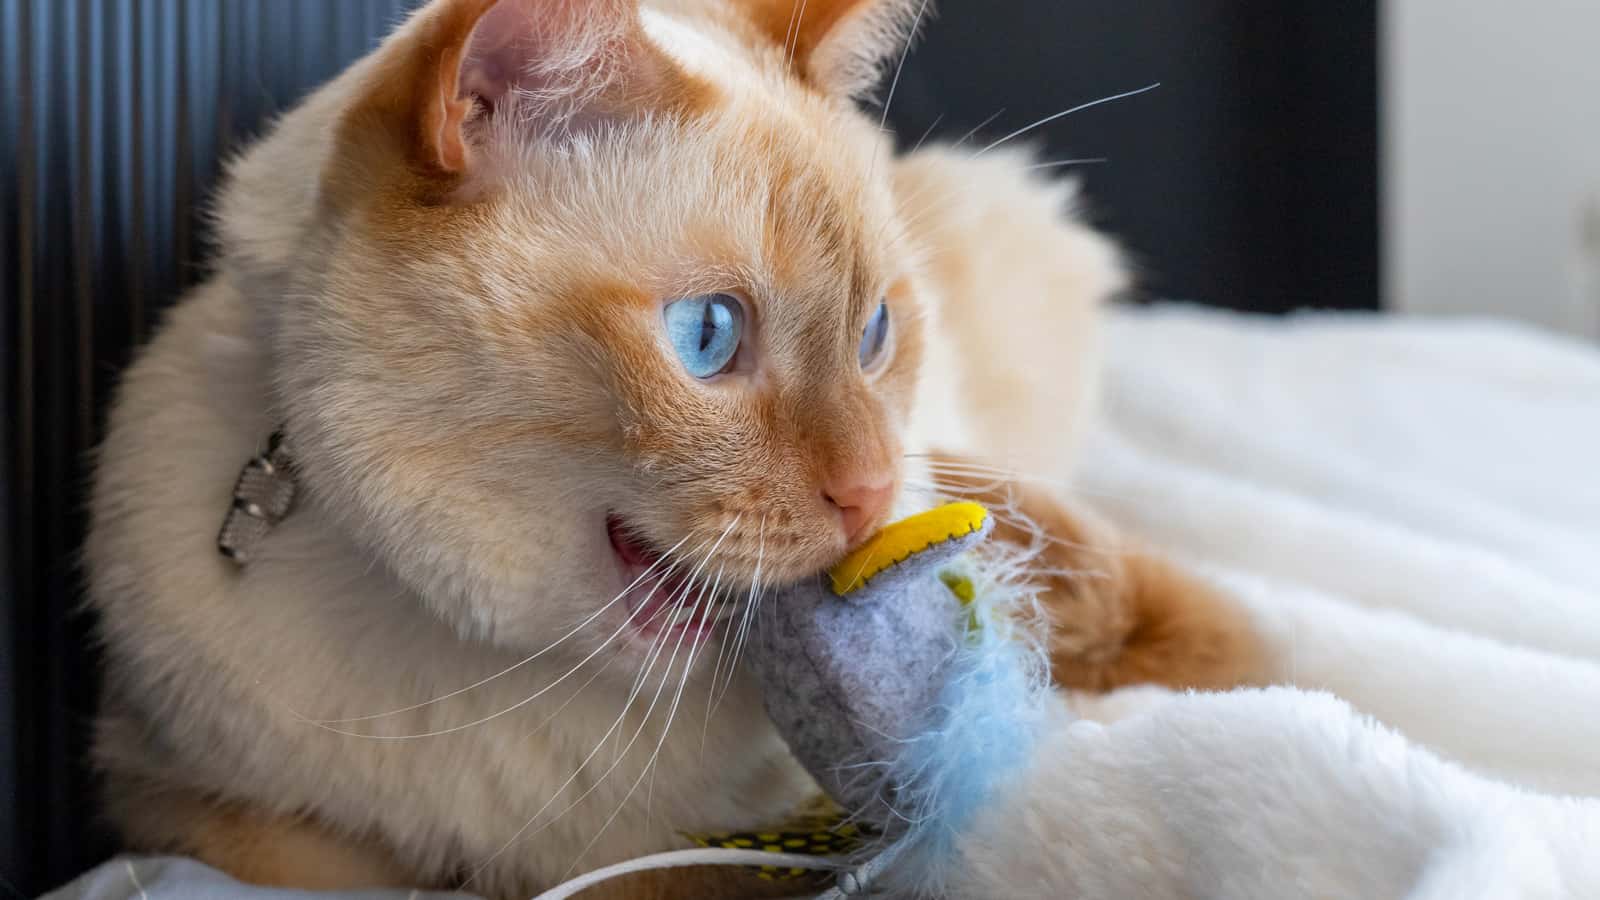 A Thai (Siamese) domestic cat with red ears and a nose lies on a bed near a warm radiator and holds a soft toy mouse in its teeth (in its mouth)